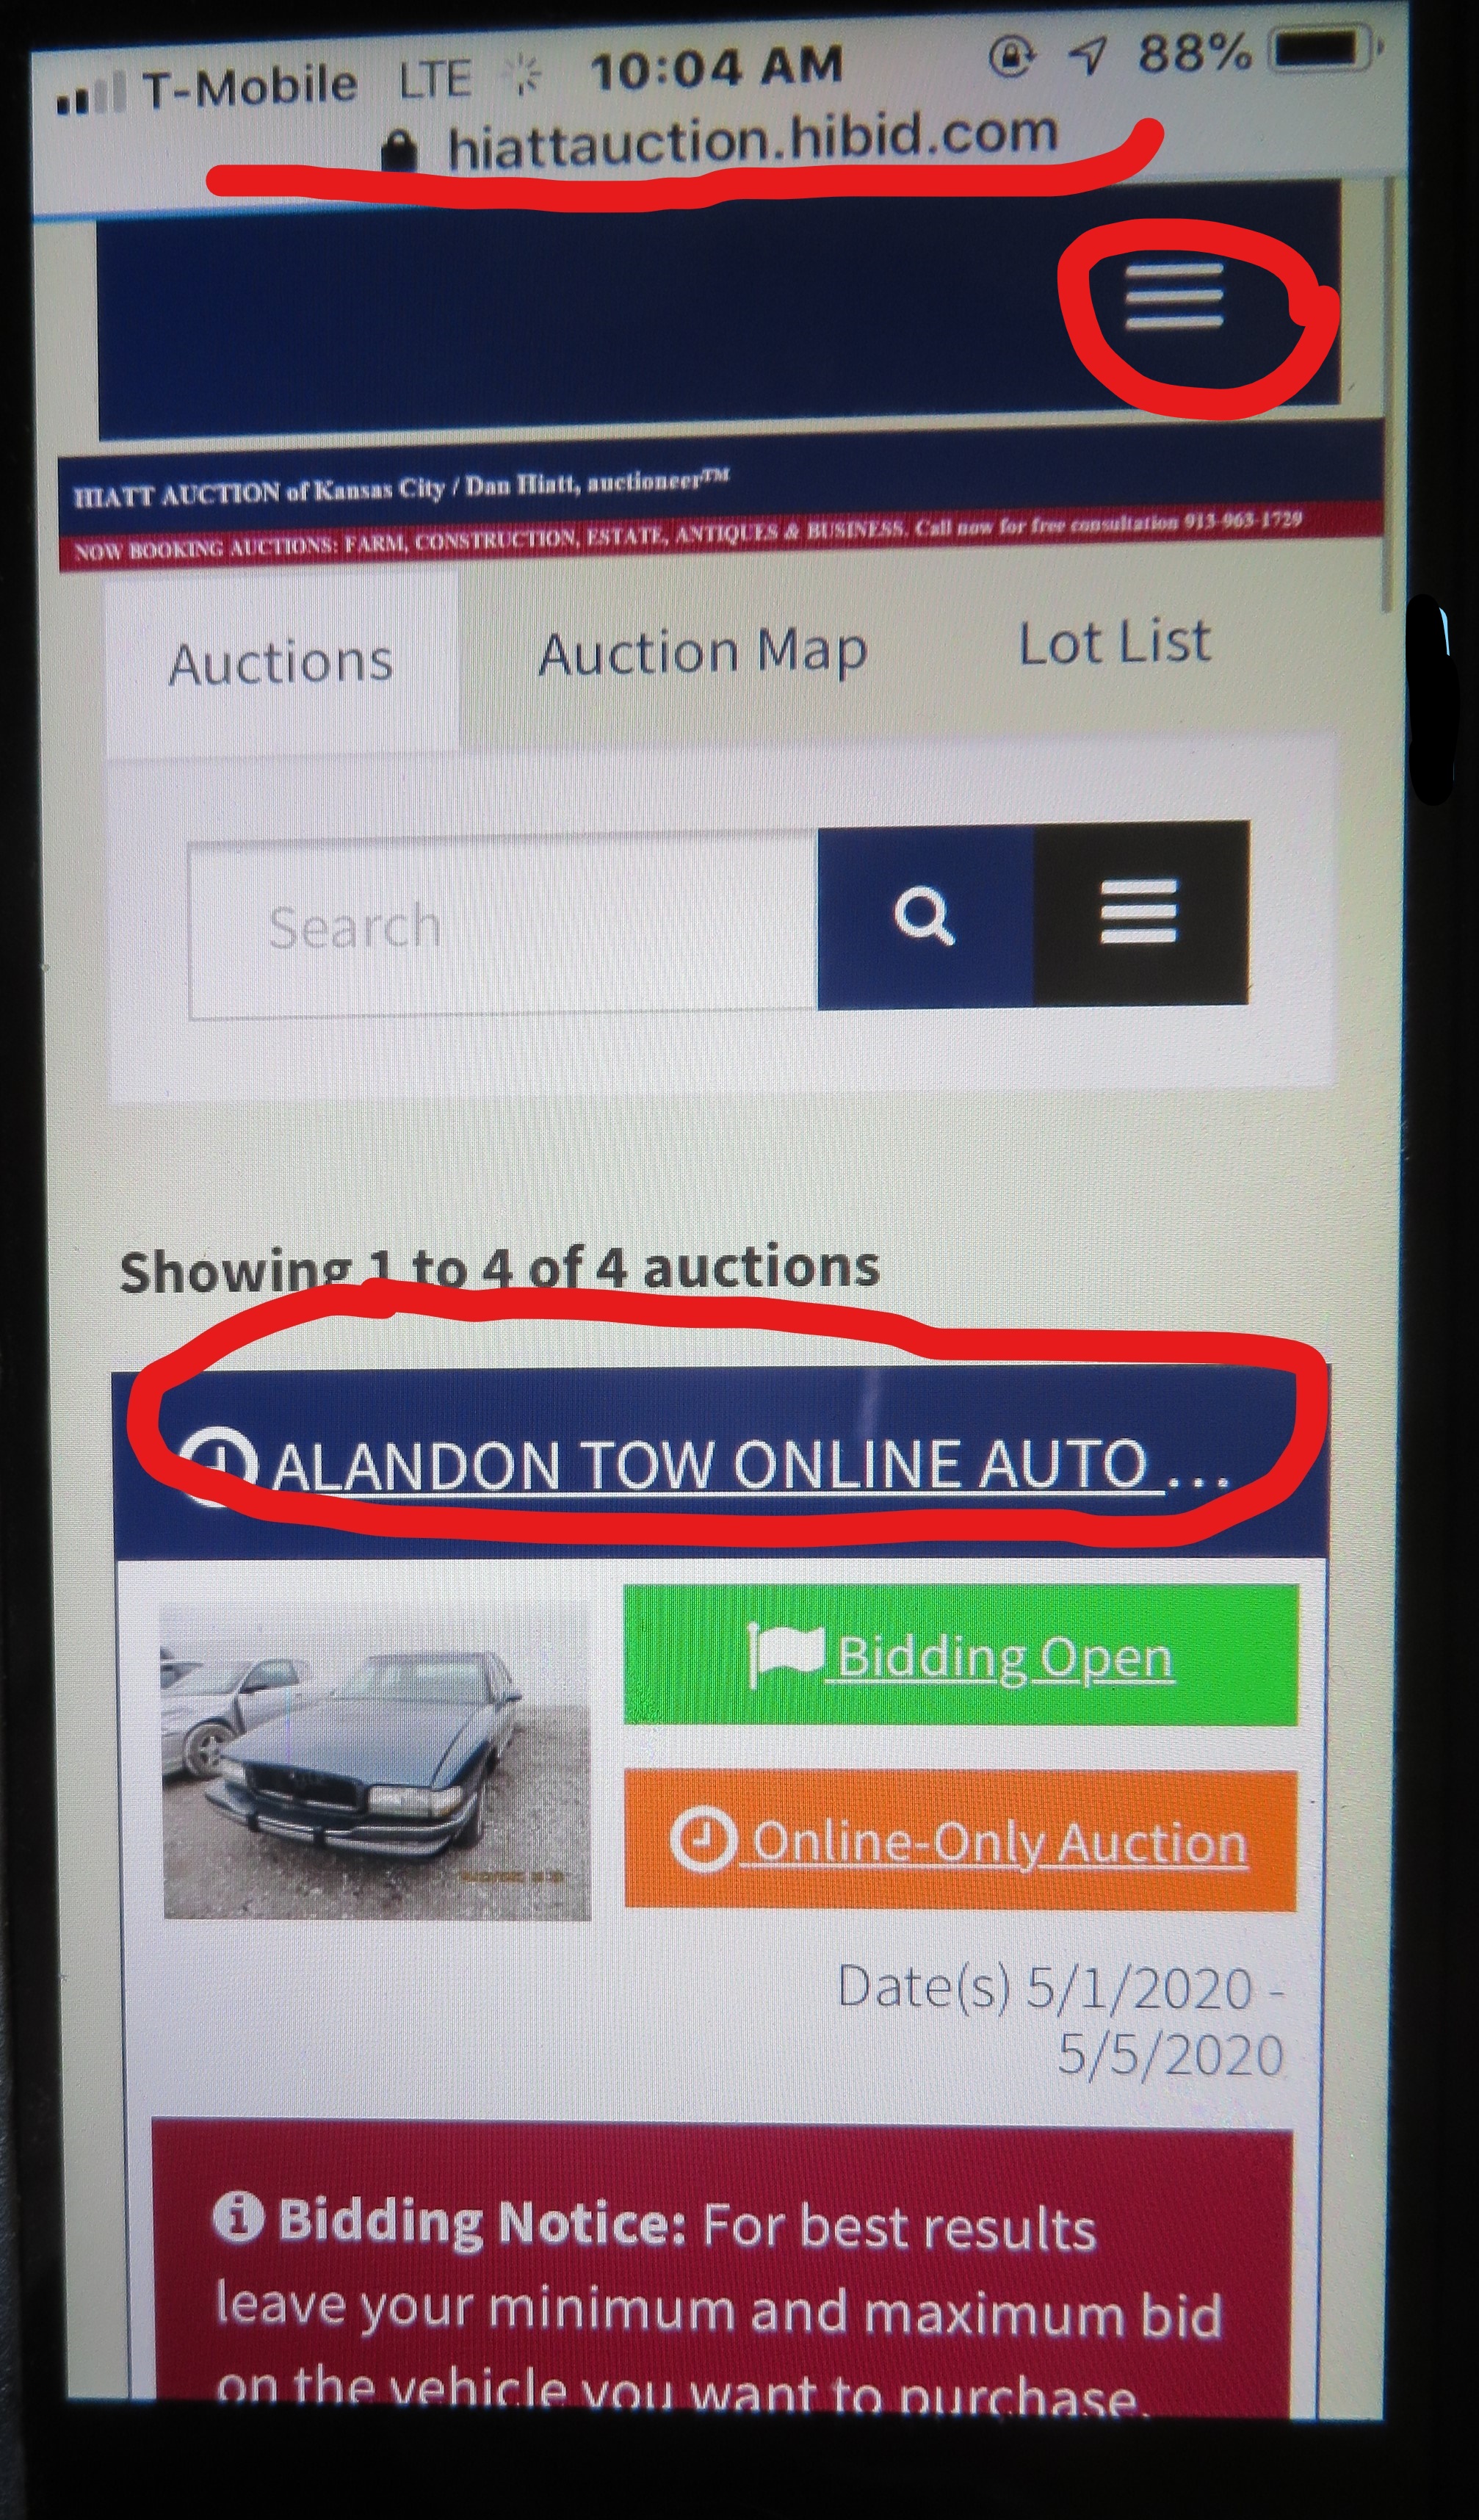 Thiswill takeyou to theOnline Auction OR
you can click on the top right hand corner to Log In orRegister.